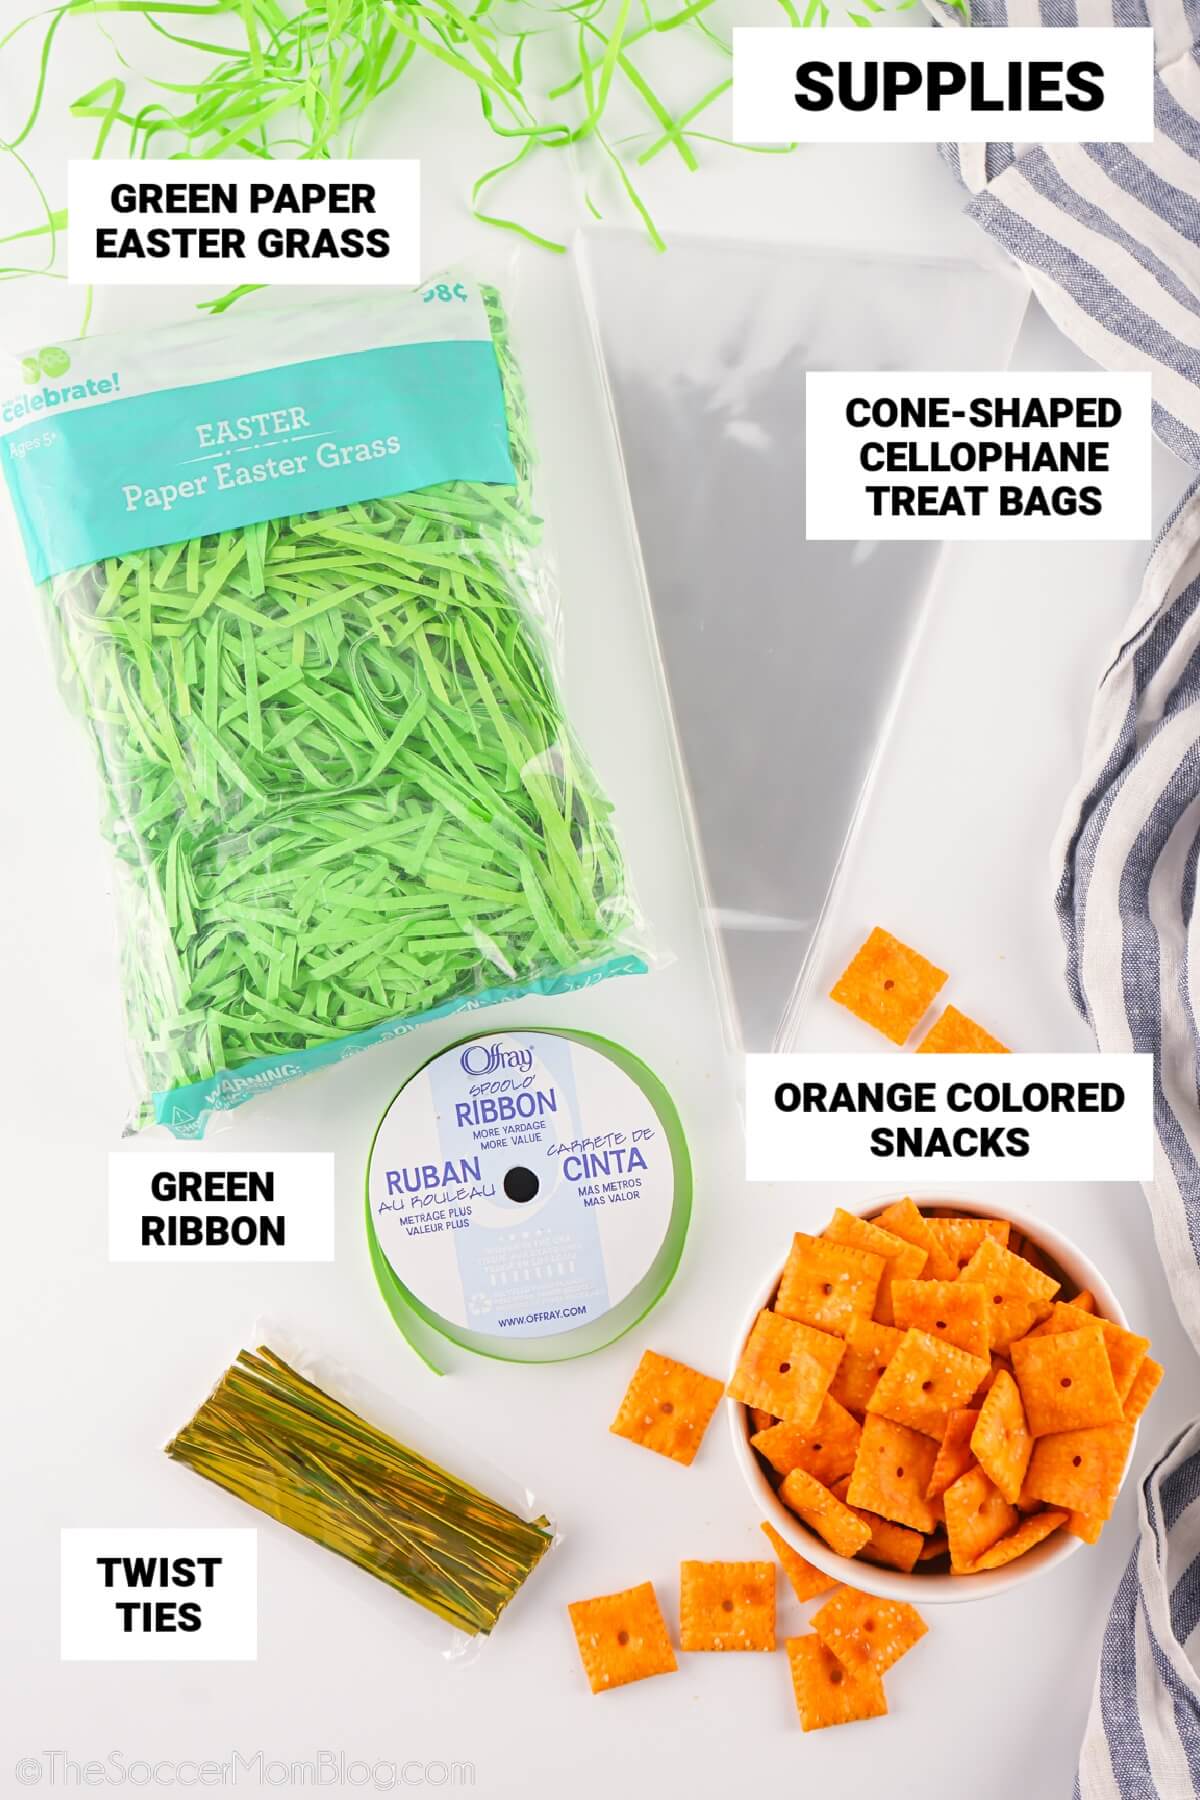 supplies needed to make carrot treat bags.